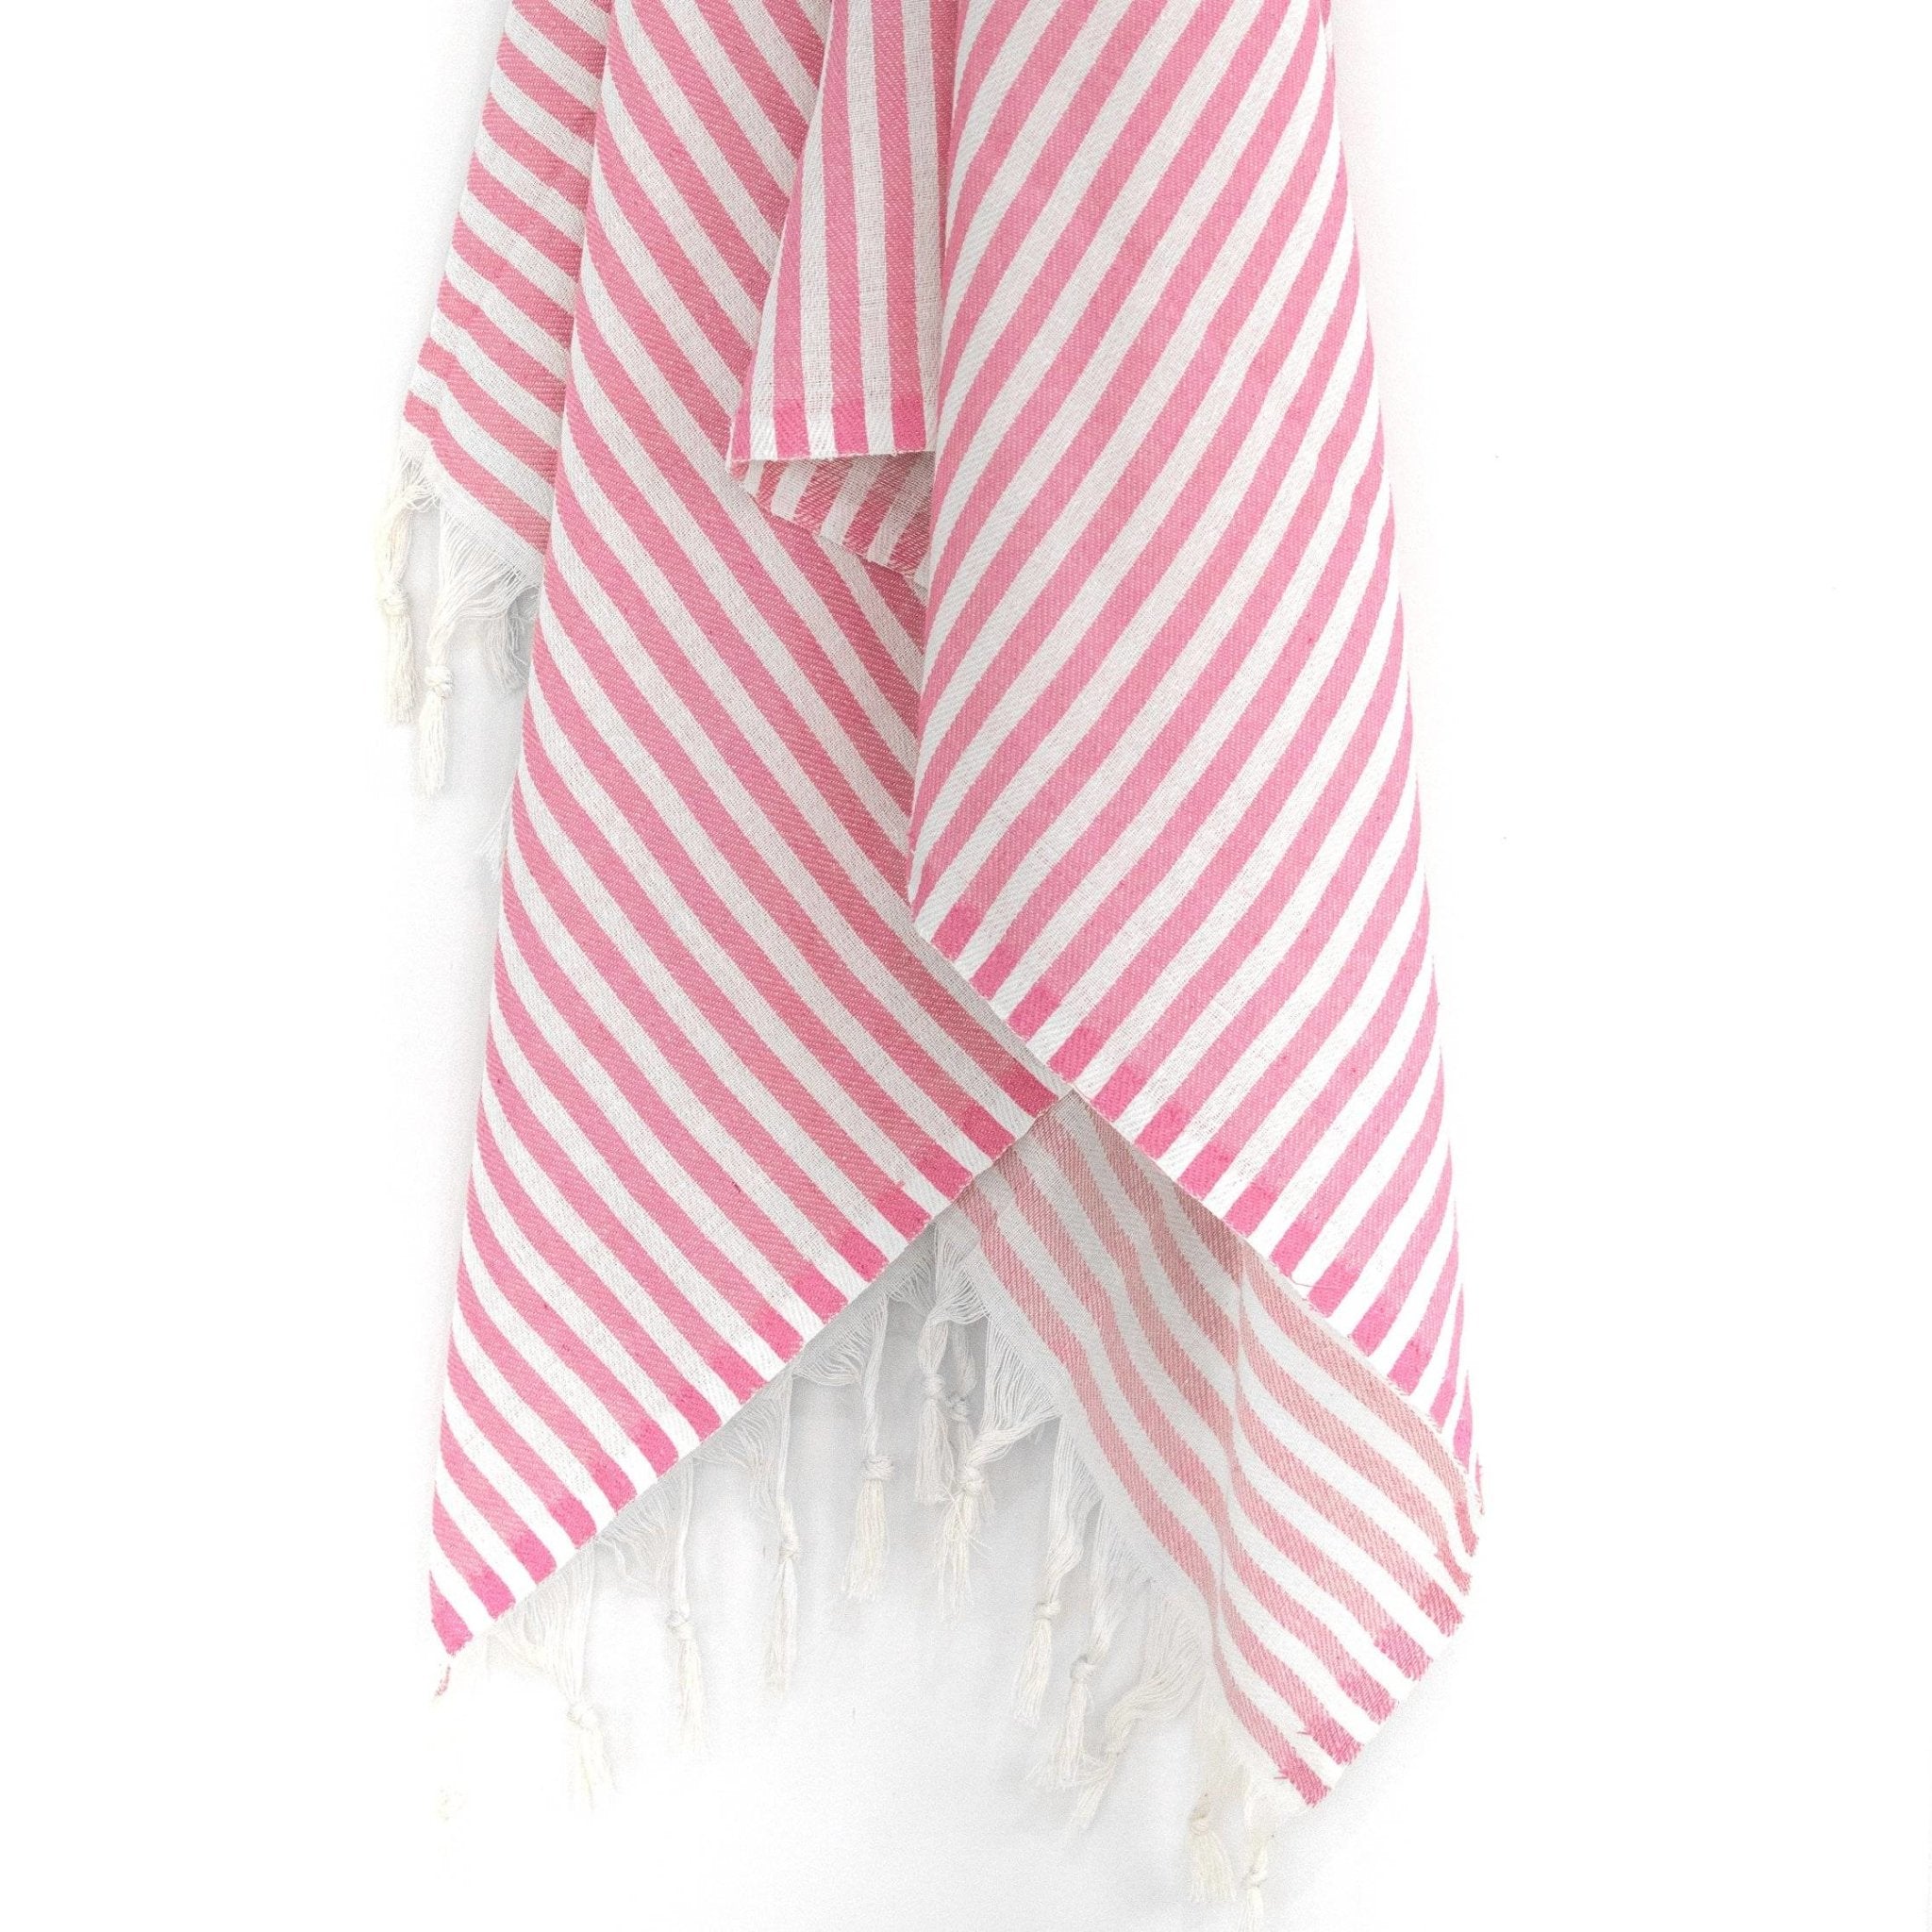 Pashtemal - Striped in Candy Pink - Near East Imports